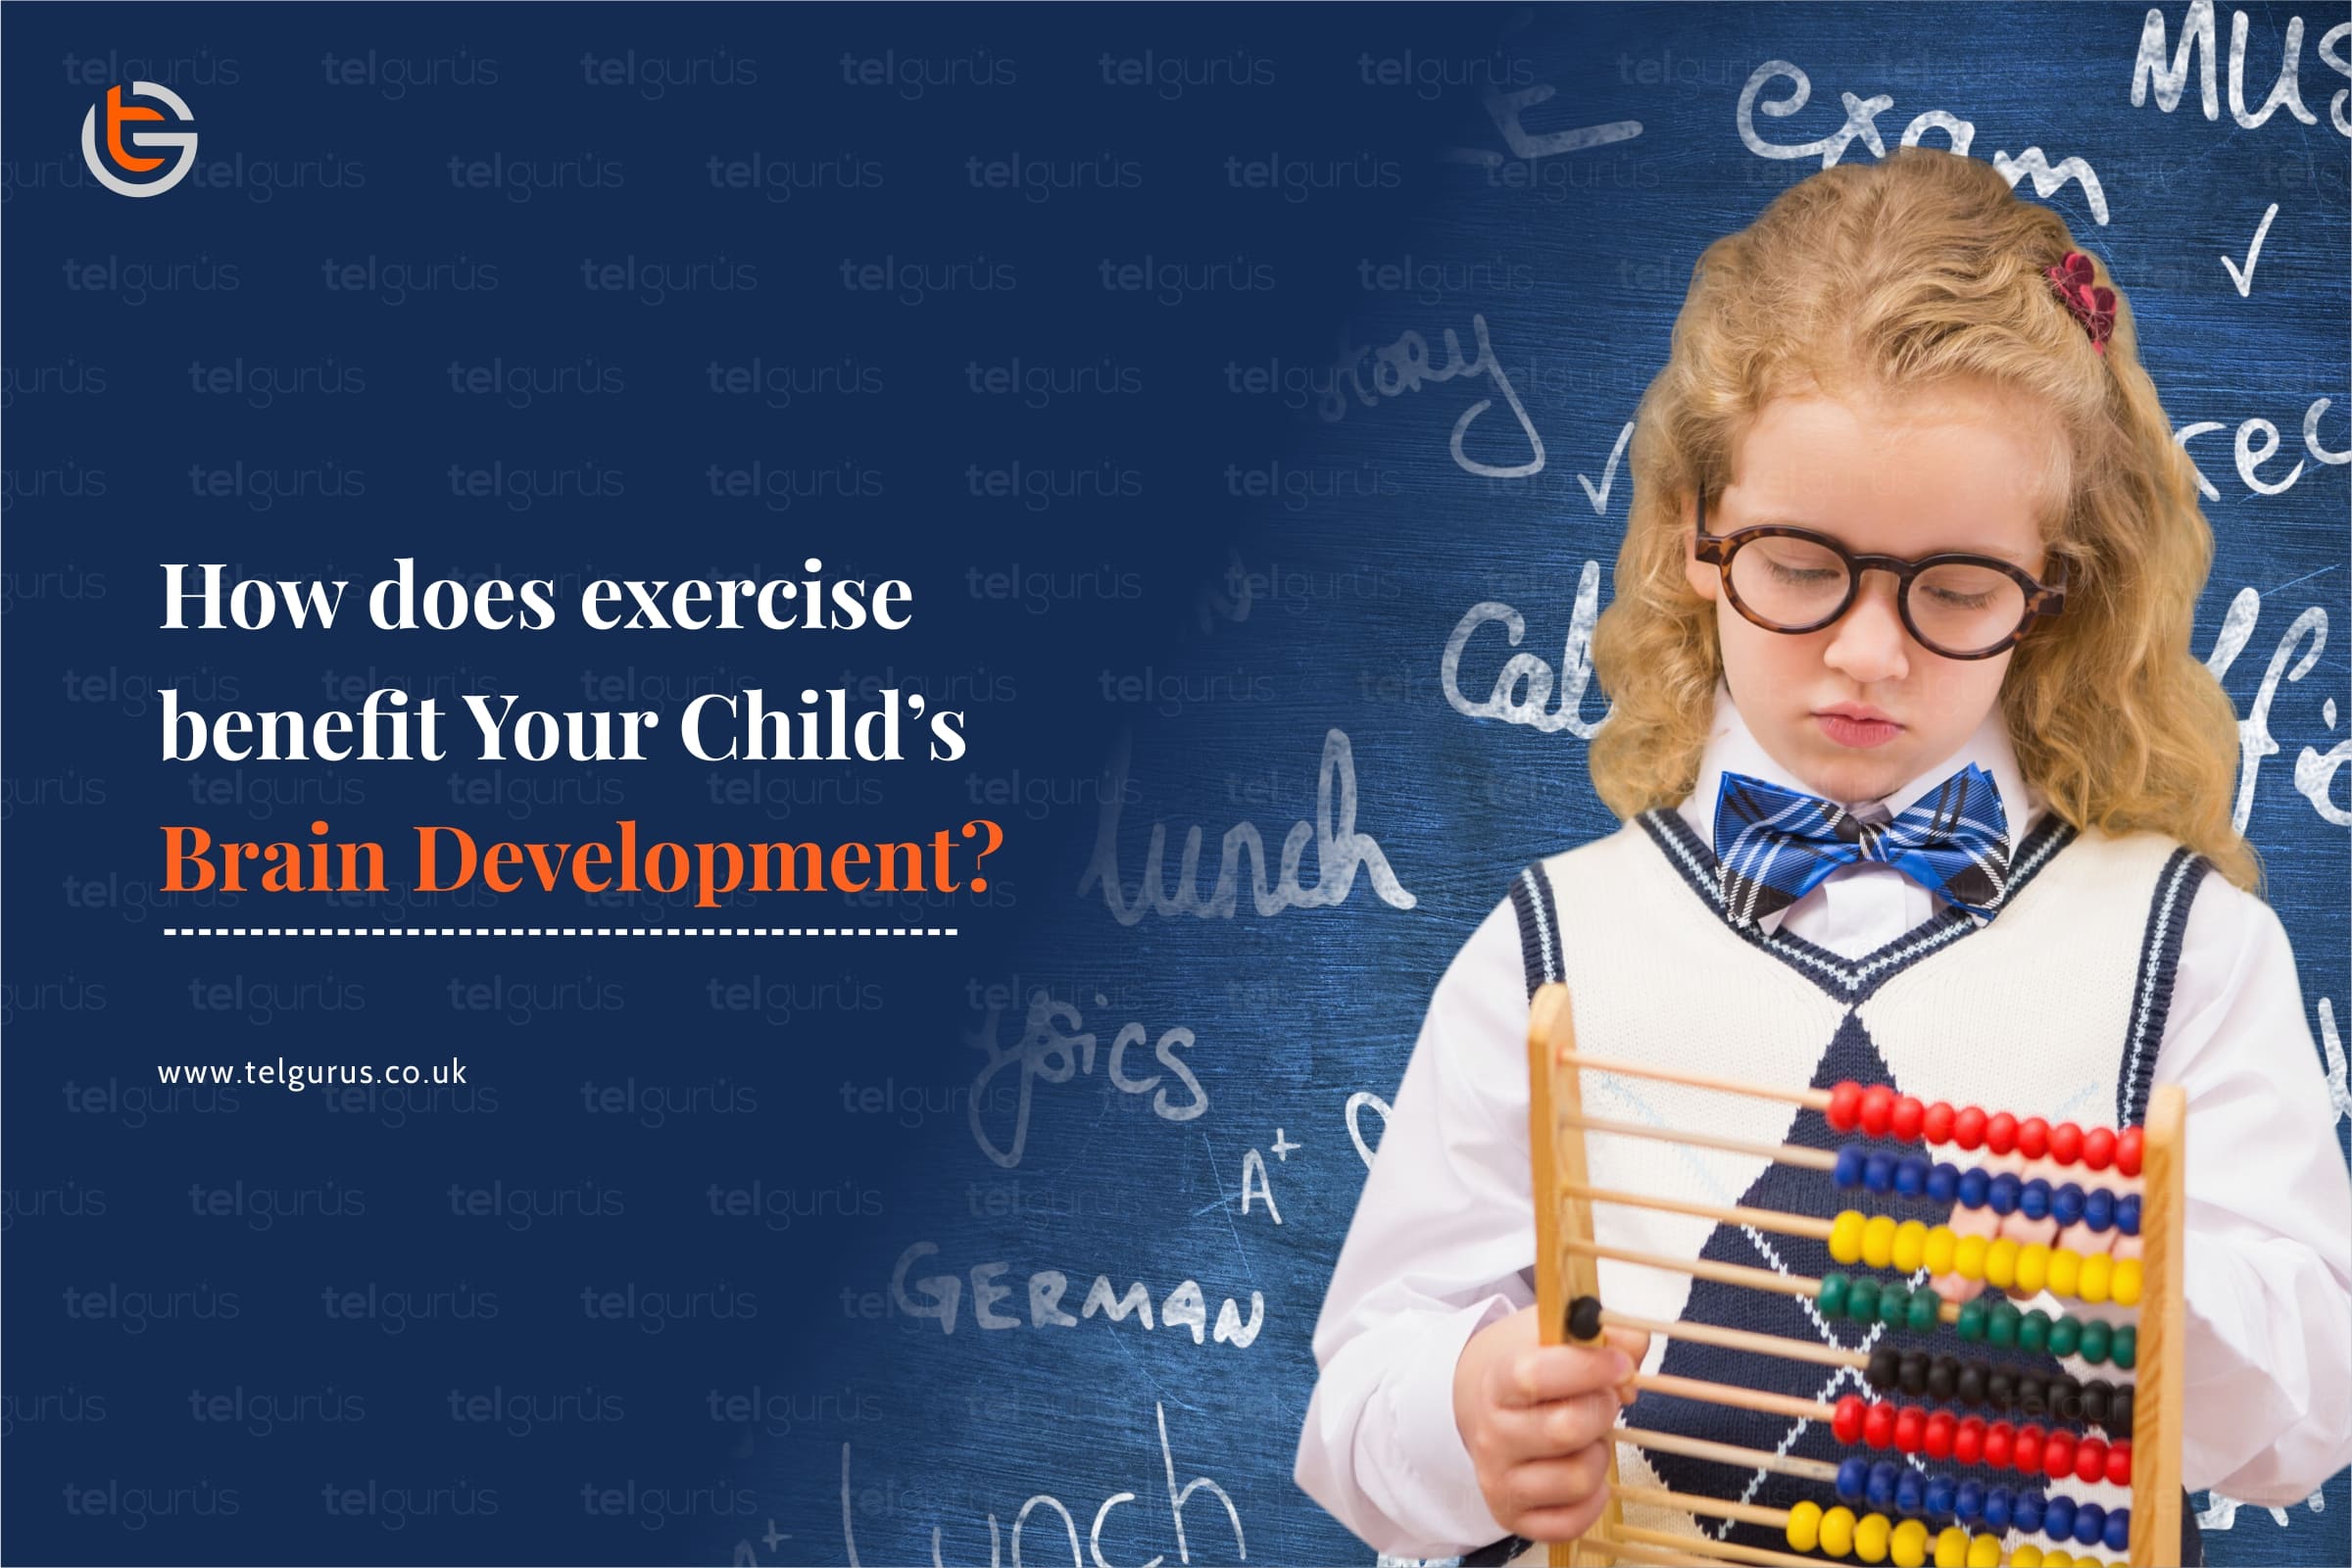 How does exercise benefit your child's brain development